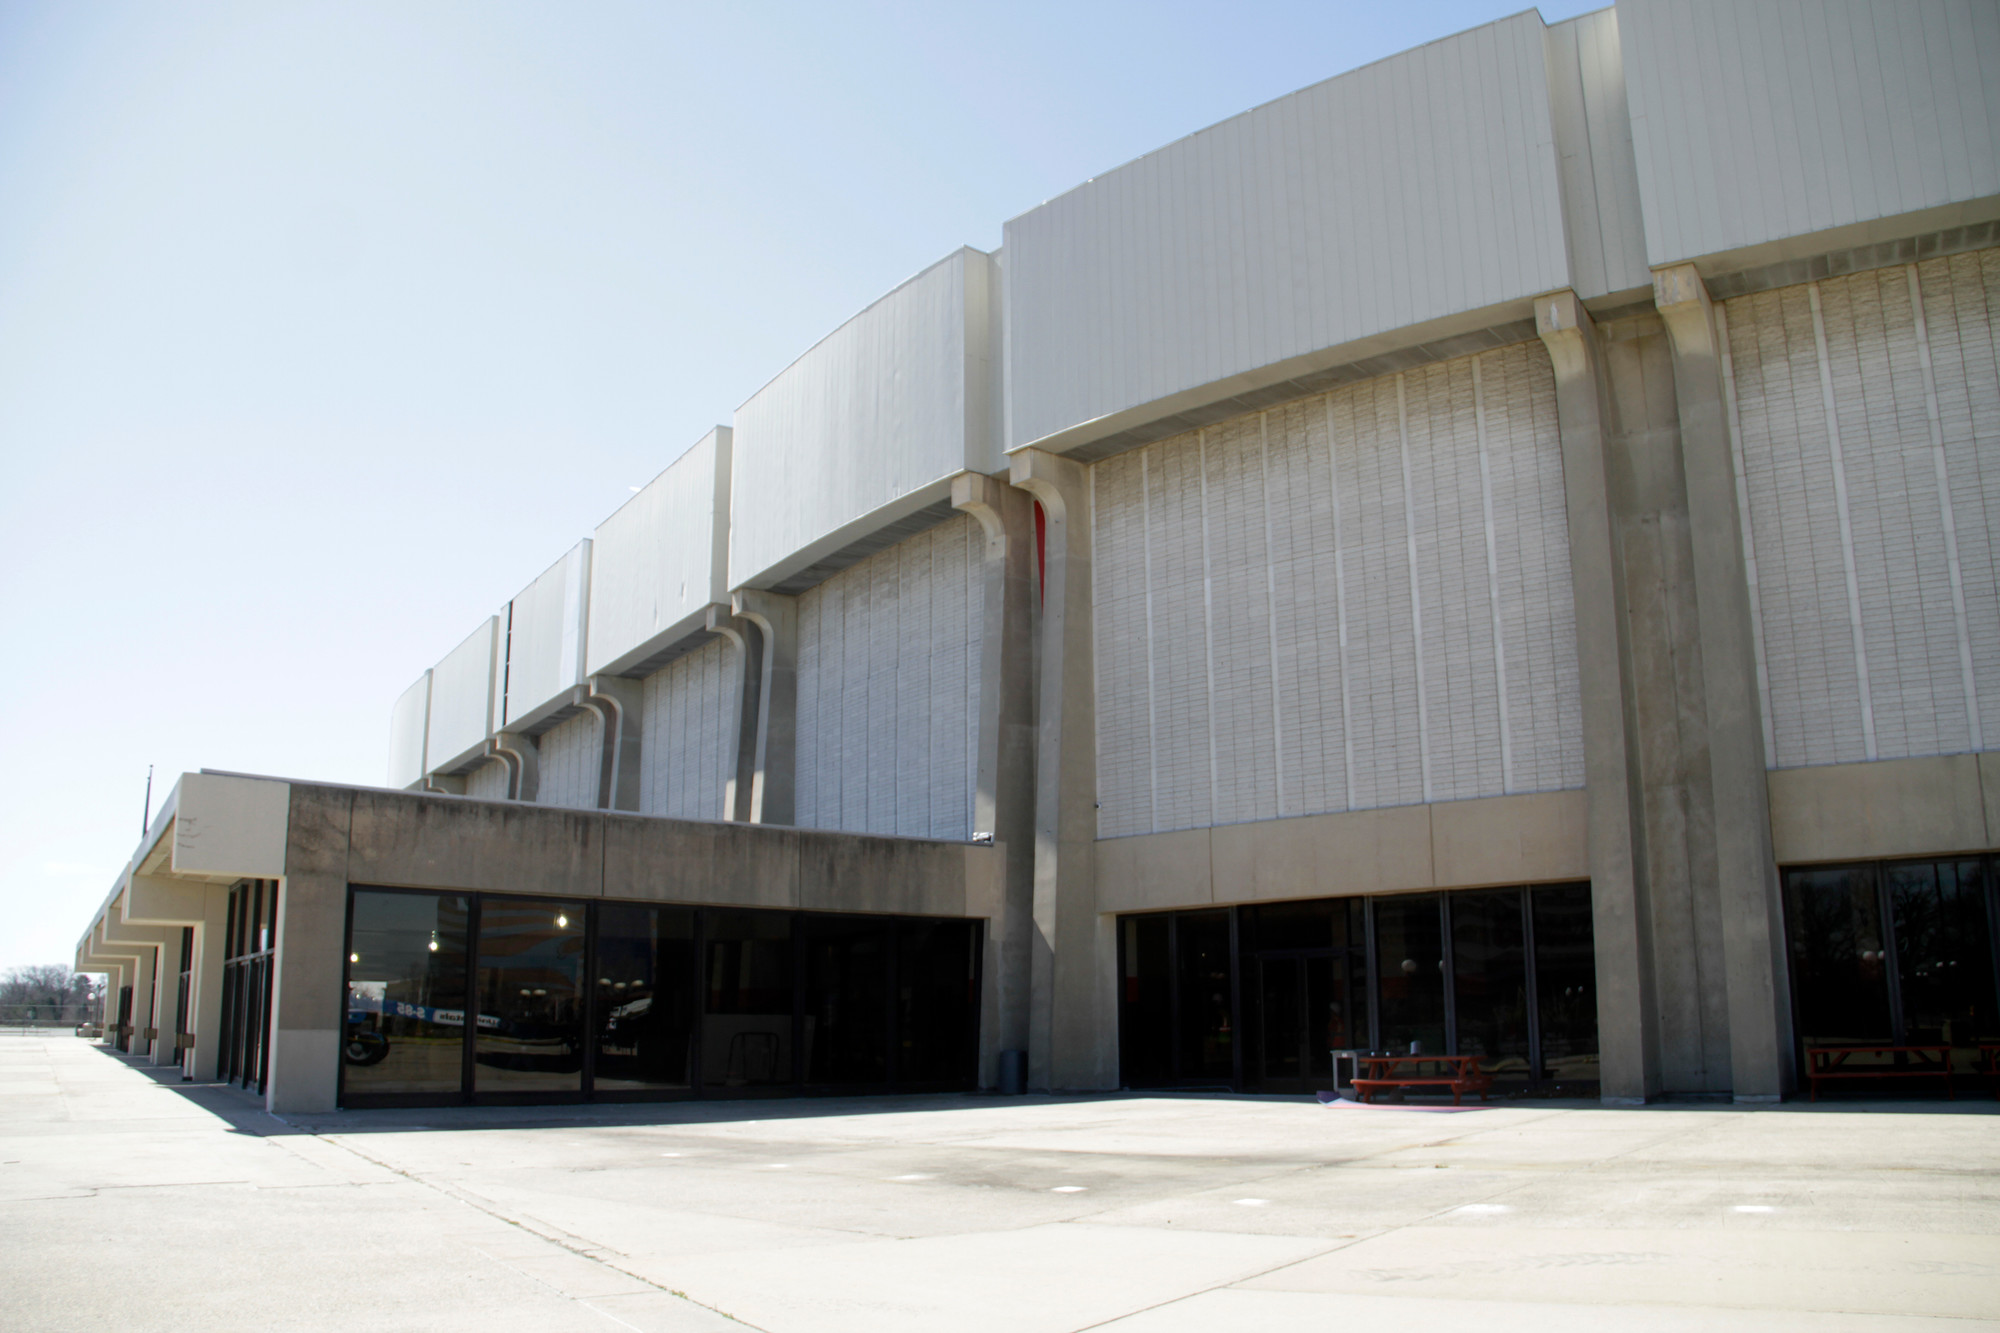 The arena’s exterior facade will be replaced in late summer or early fall, according to NEC.